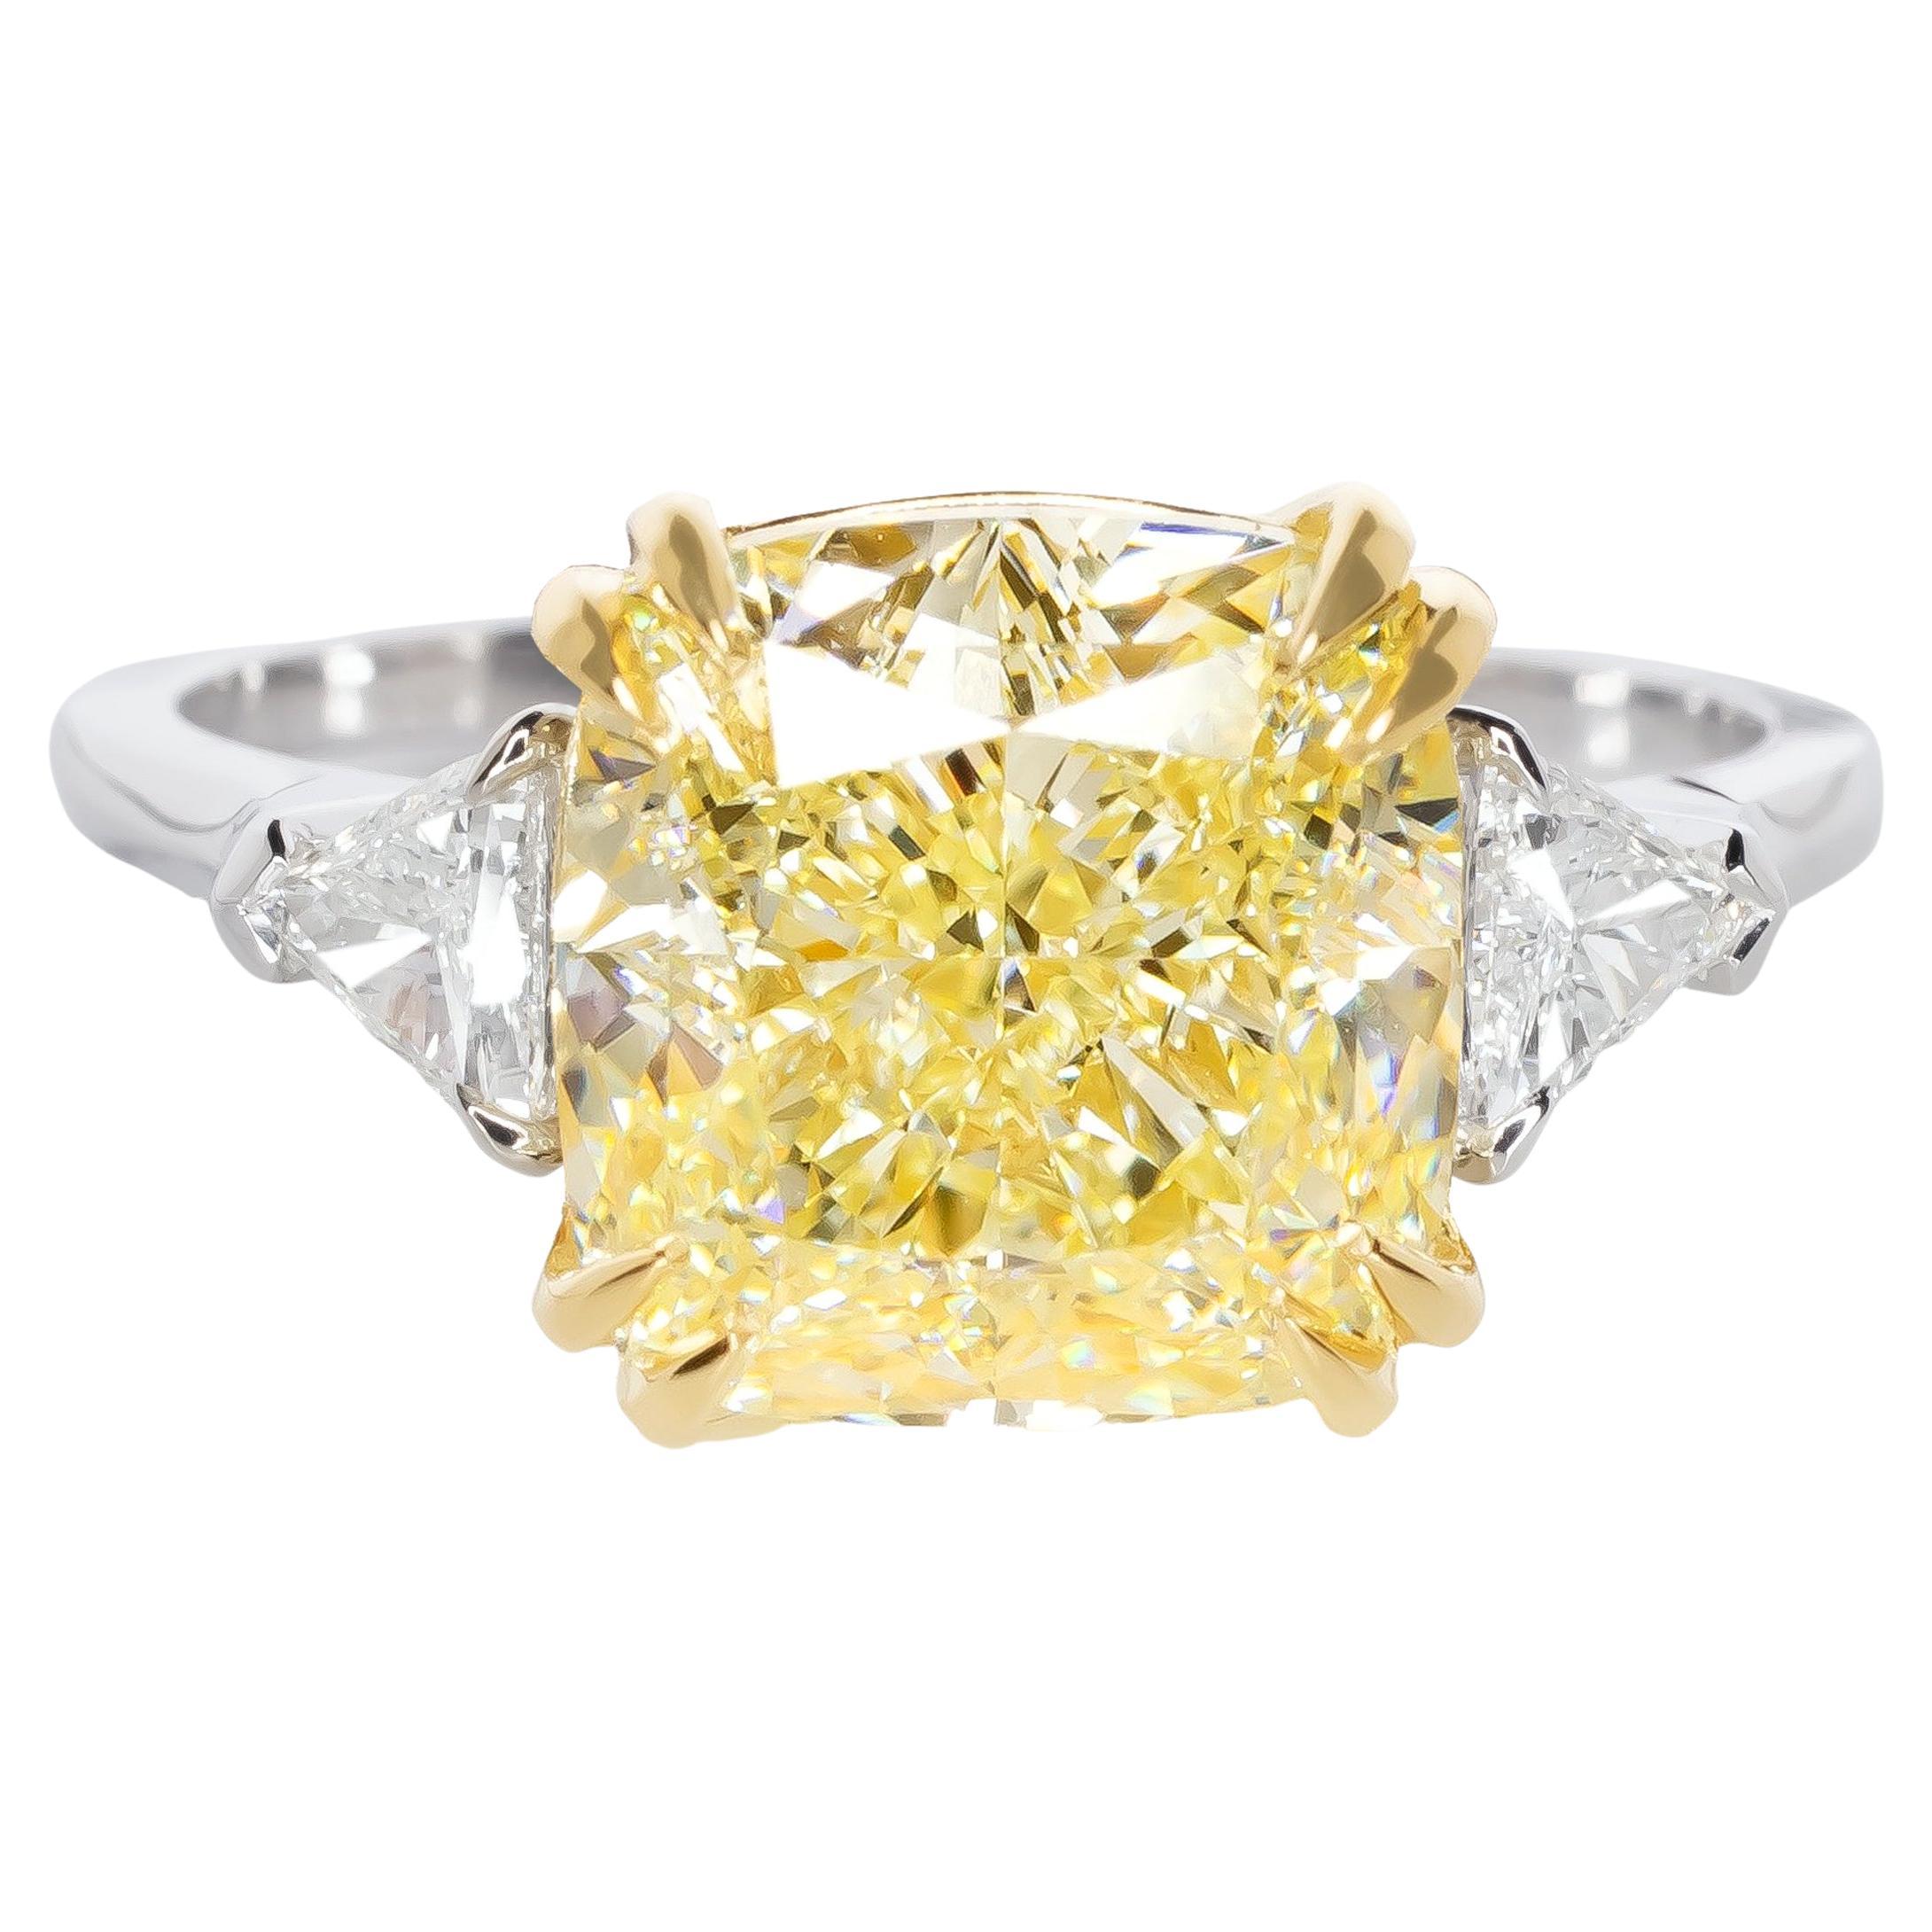 Flawless GIA Certified 4 Carat Fancy Light Yellow Cushion Diamond 18k Gold Ring For Sale